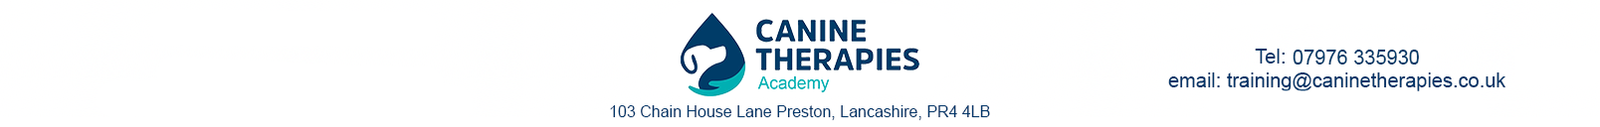 Canine Therapies Academy contact: training@caninetherapies.co.uk, 07976 335930